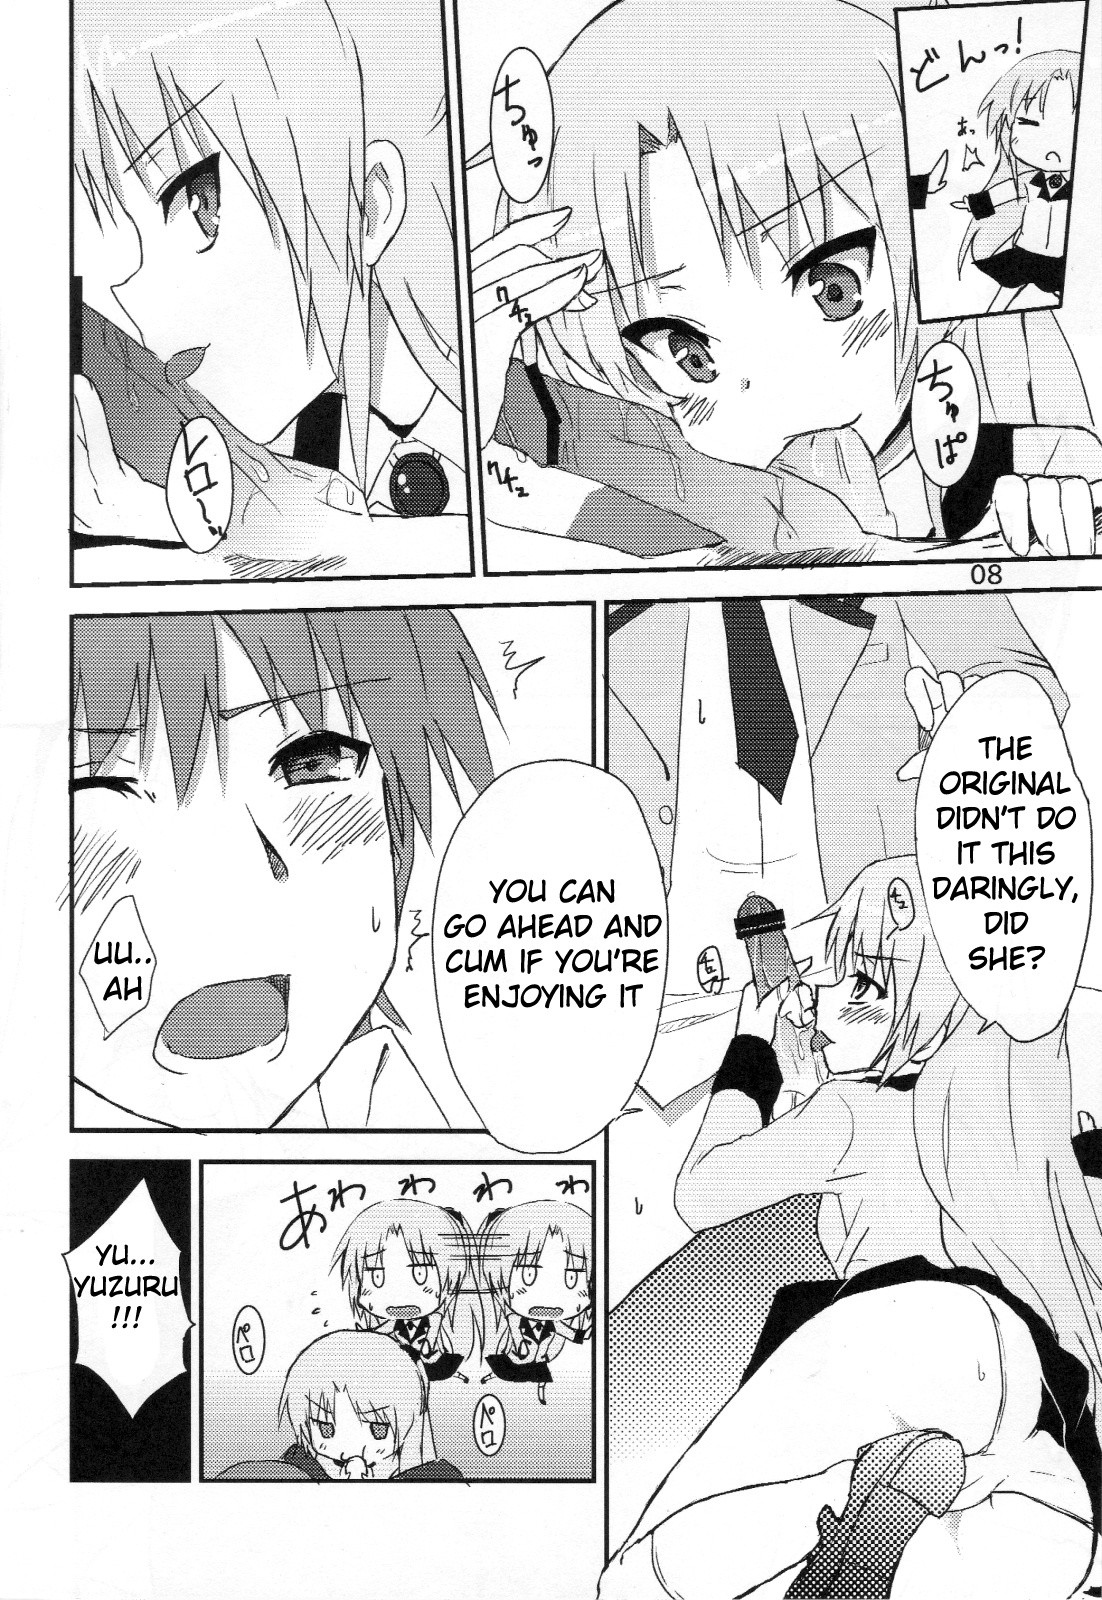 My Heart is yours! ver.2 hentai manga picture 6